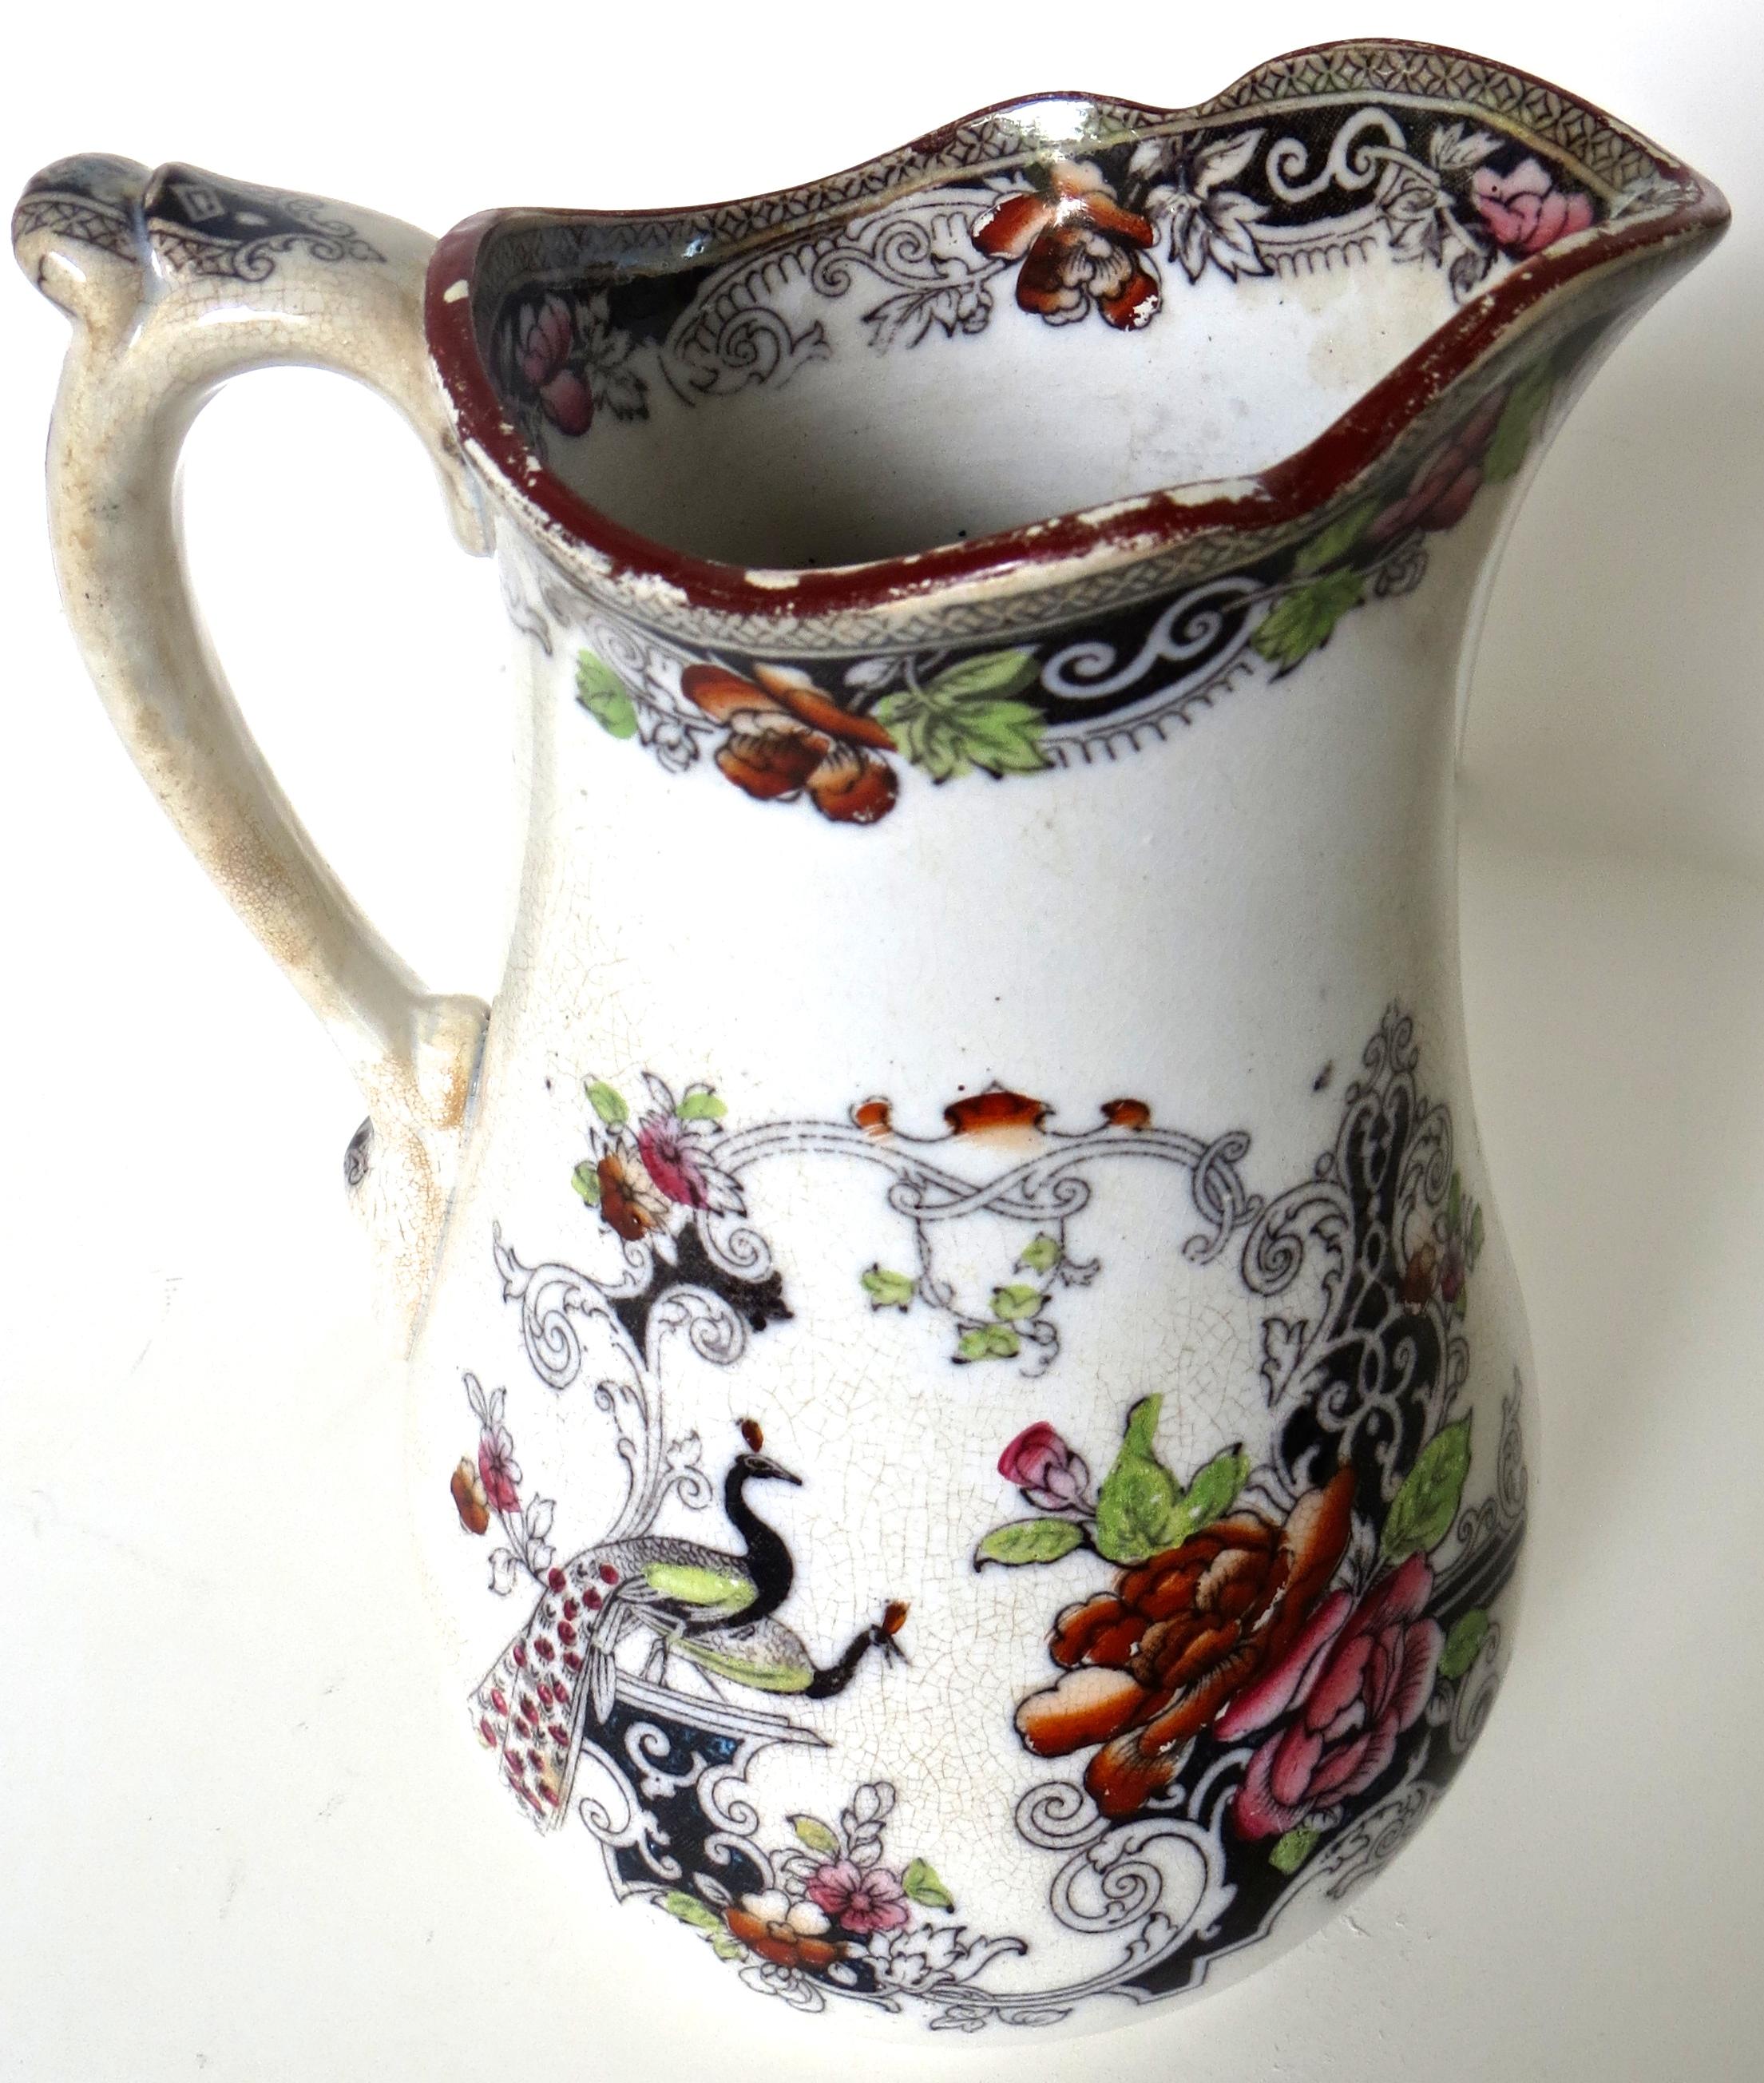 Nice example of an ironstone pitcher, hand painted from copper plate transfers in the Chinese Manduran pattern depicting peacocks and abundant floral decoration in a Famille Rose style (see image). Design was made popular by Mason's company, albeit,